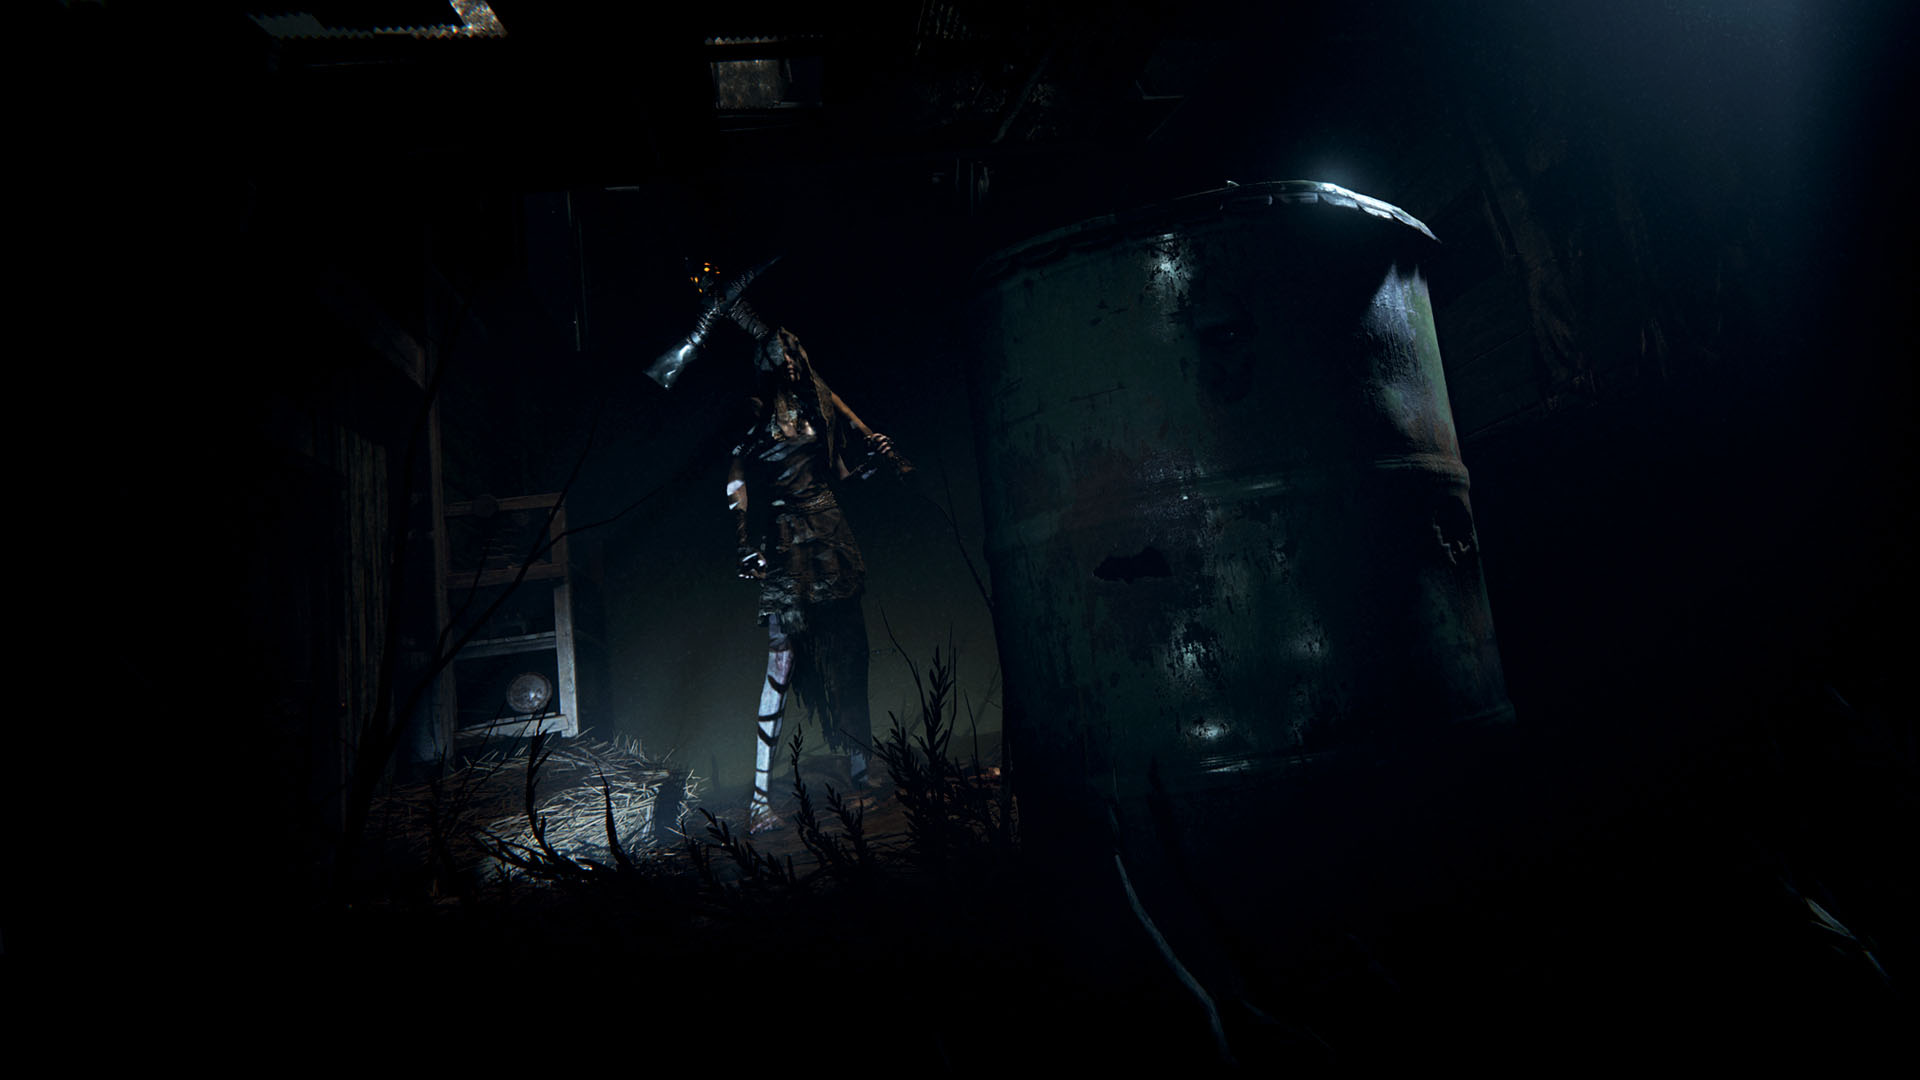 Outlast is a household name when it come to horror and this looks